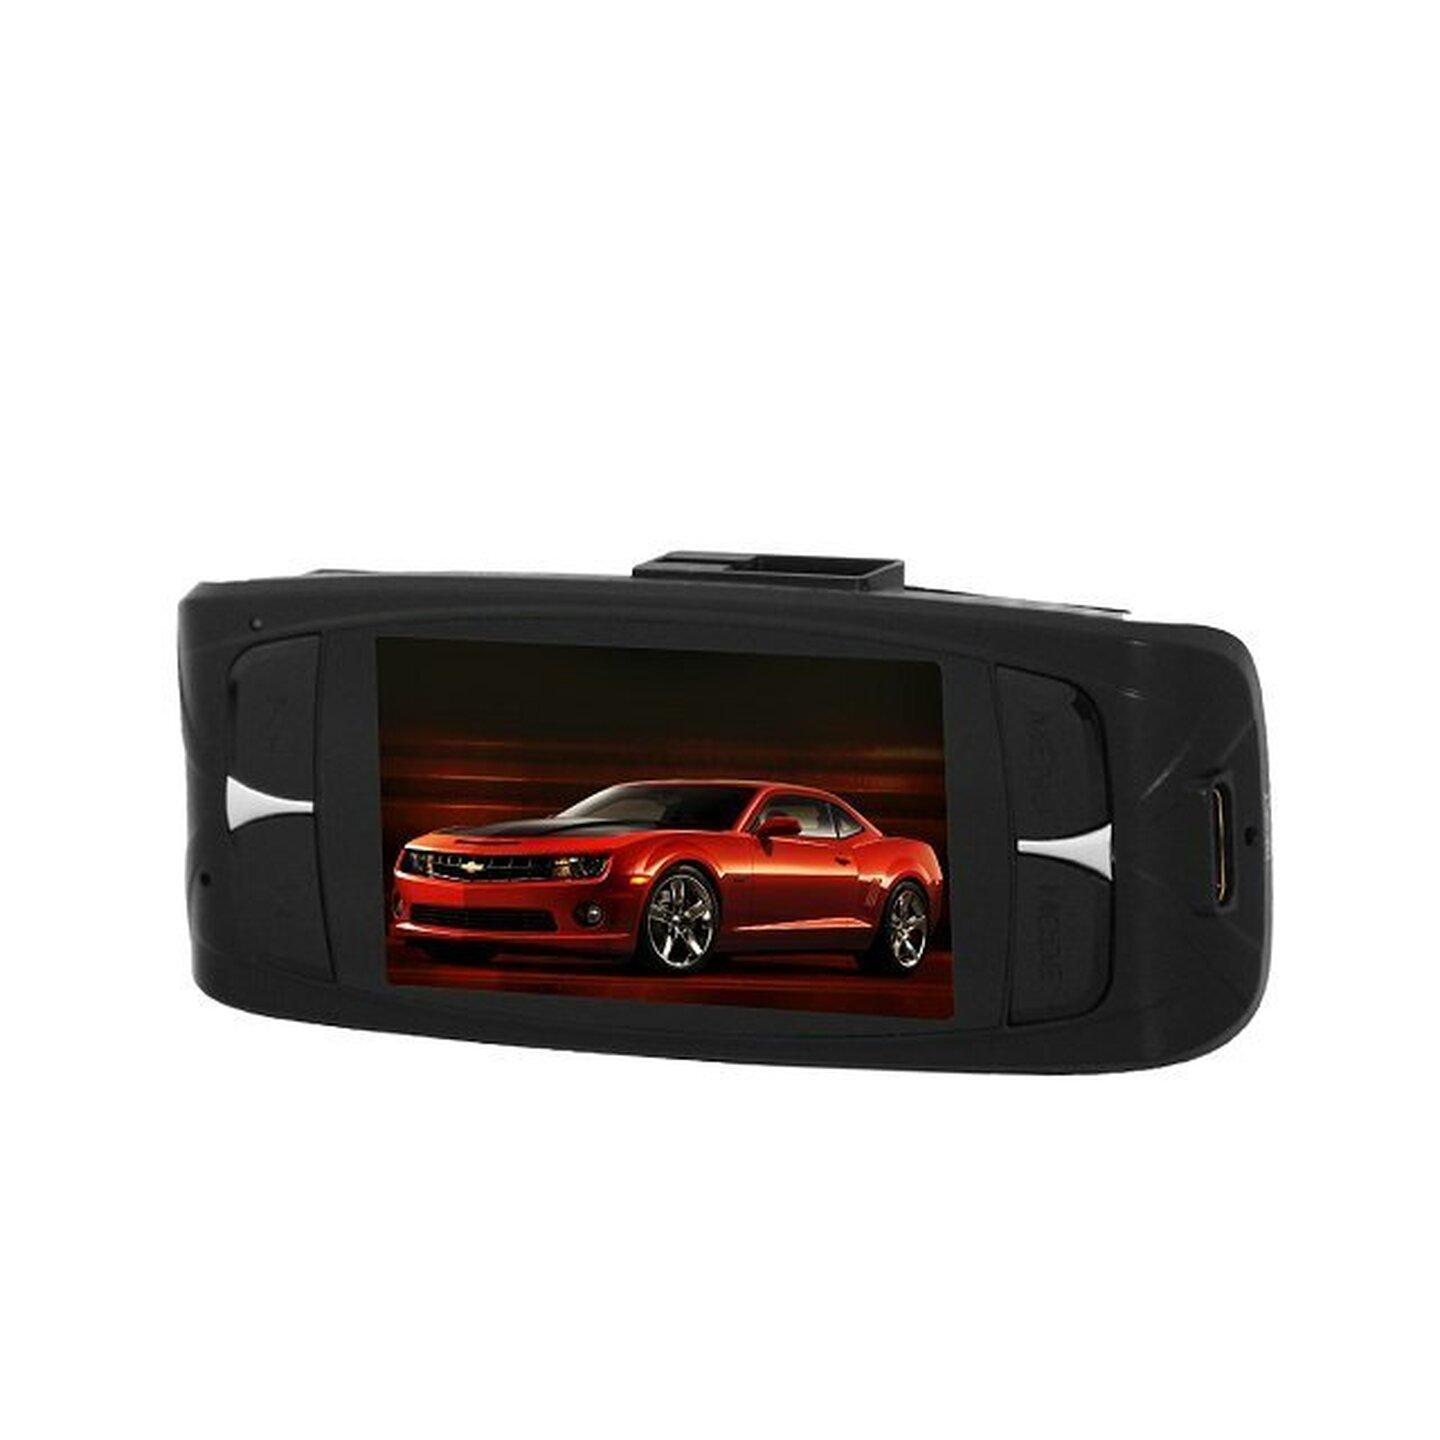 1080p Car Event Recorder with 2.7 LCD Display